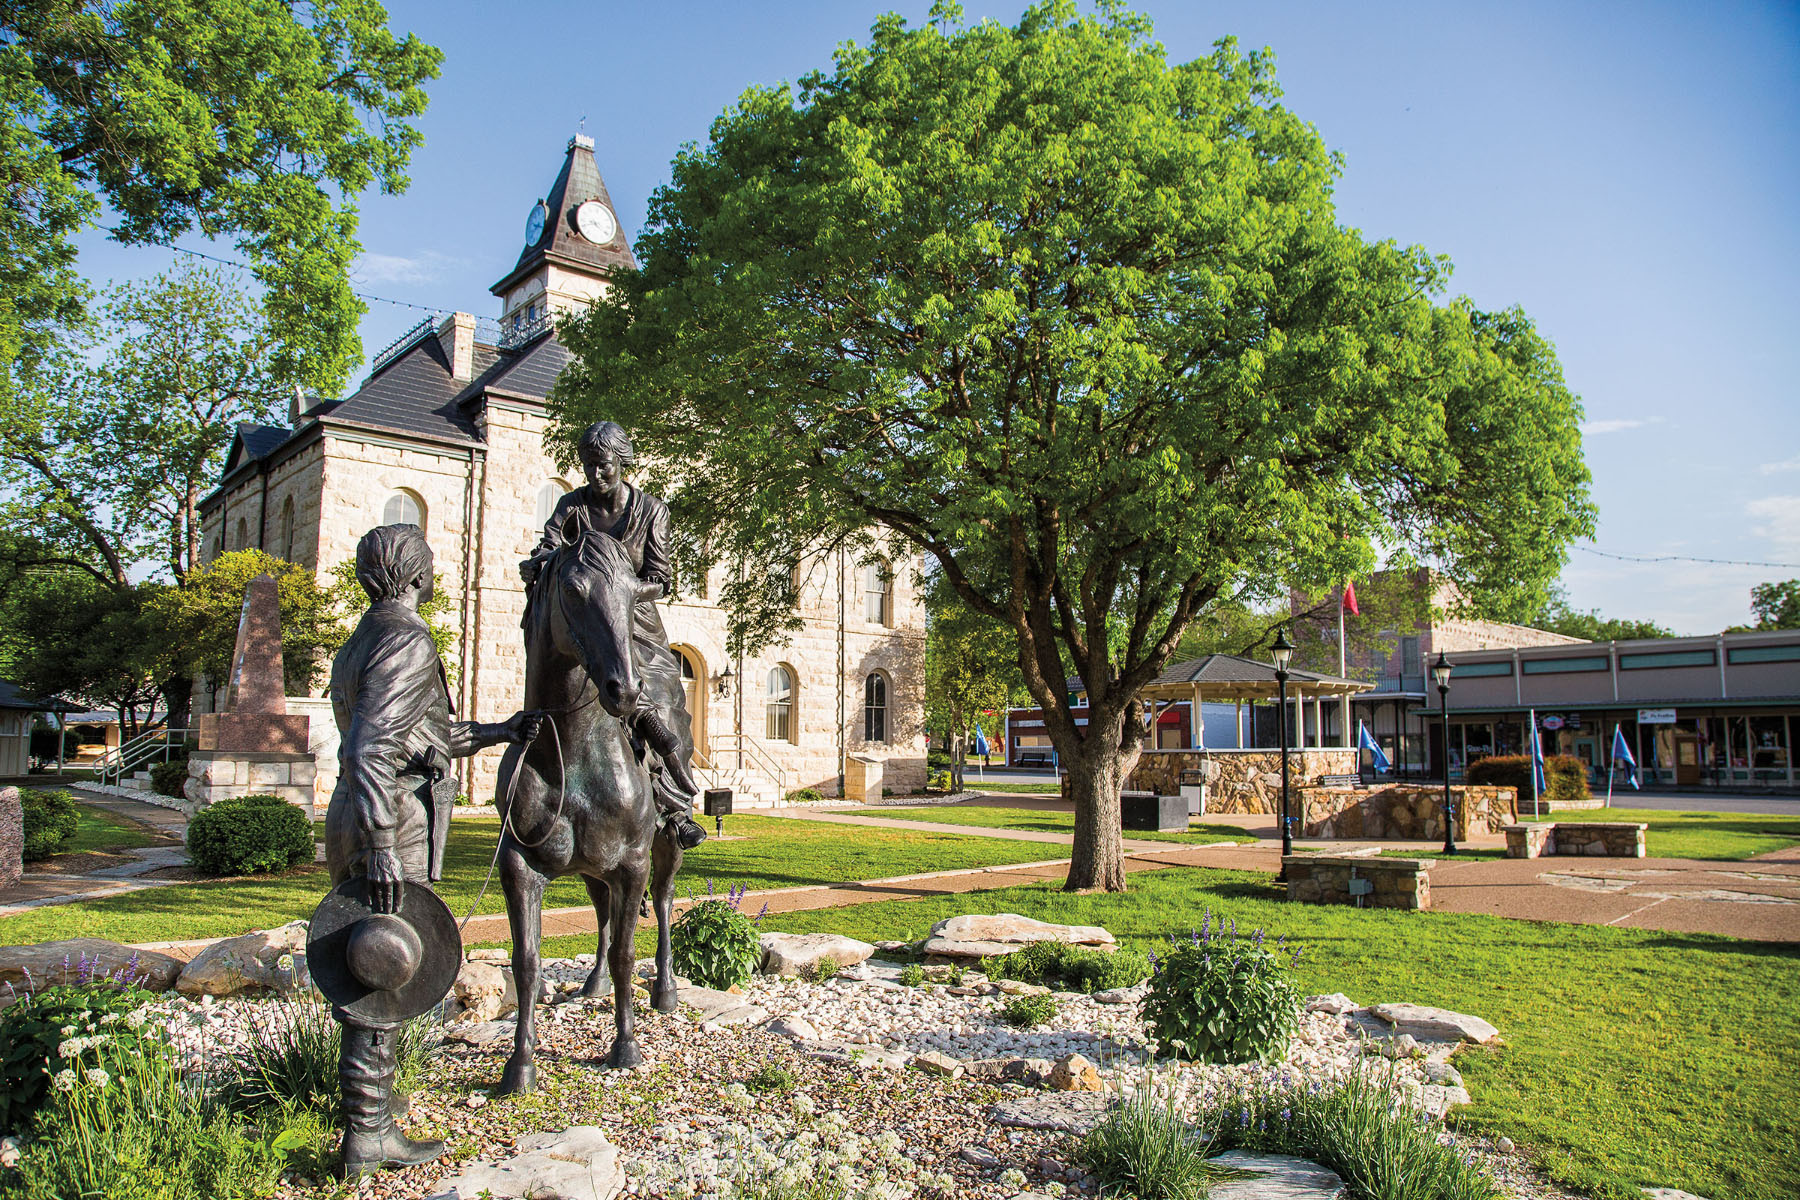 Two dark bronze statues in a green yard in front of a stone courthouse